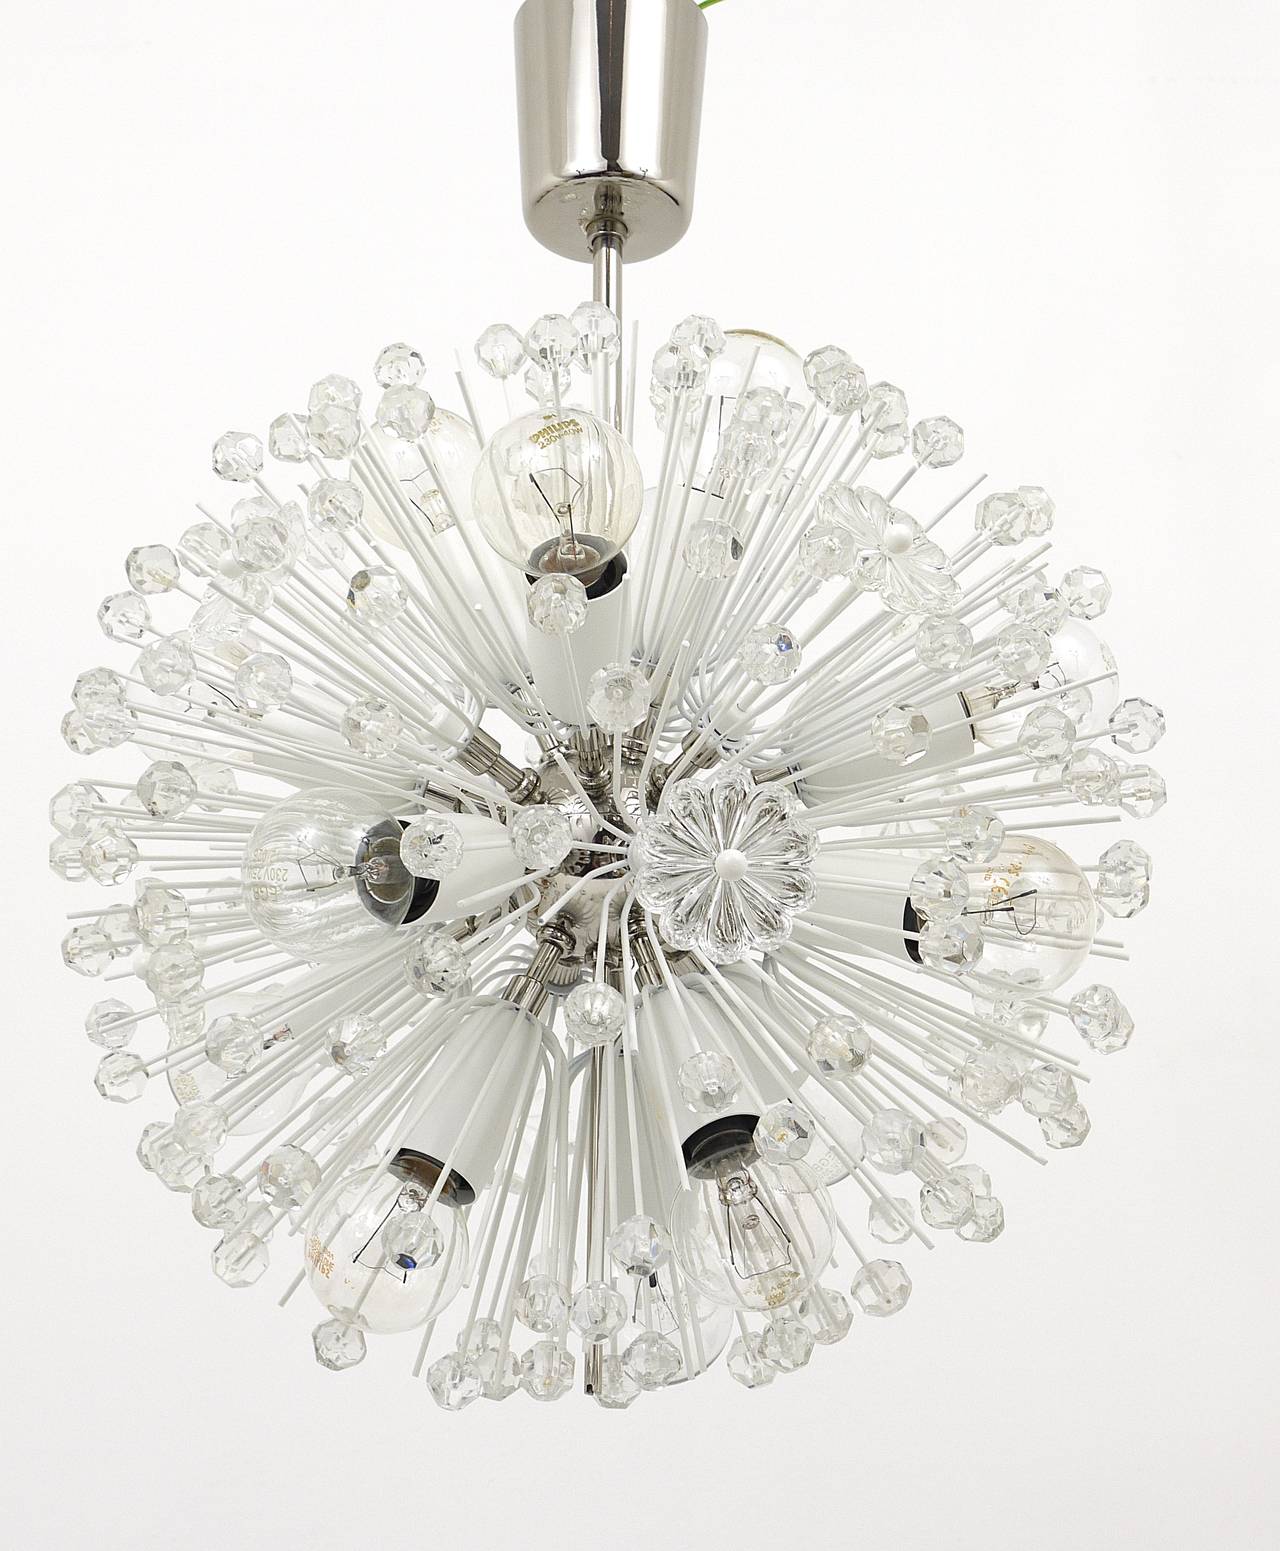 A beautiful  Mid-Century snowflake blowball sputnik chandelier from the 1950s. Designed by Emil Stejnar, manufactured by Rupert Nikoll Vienna / Austria. Made of nickel-plated brass, fully covered with faceted crystal balls and glass flowers.  It